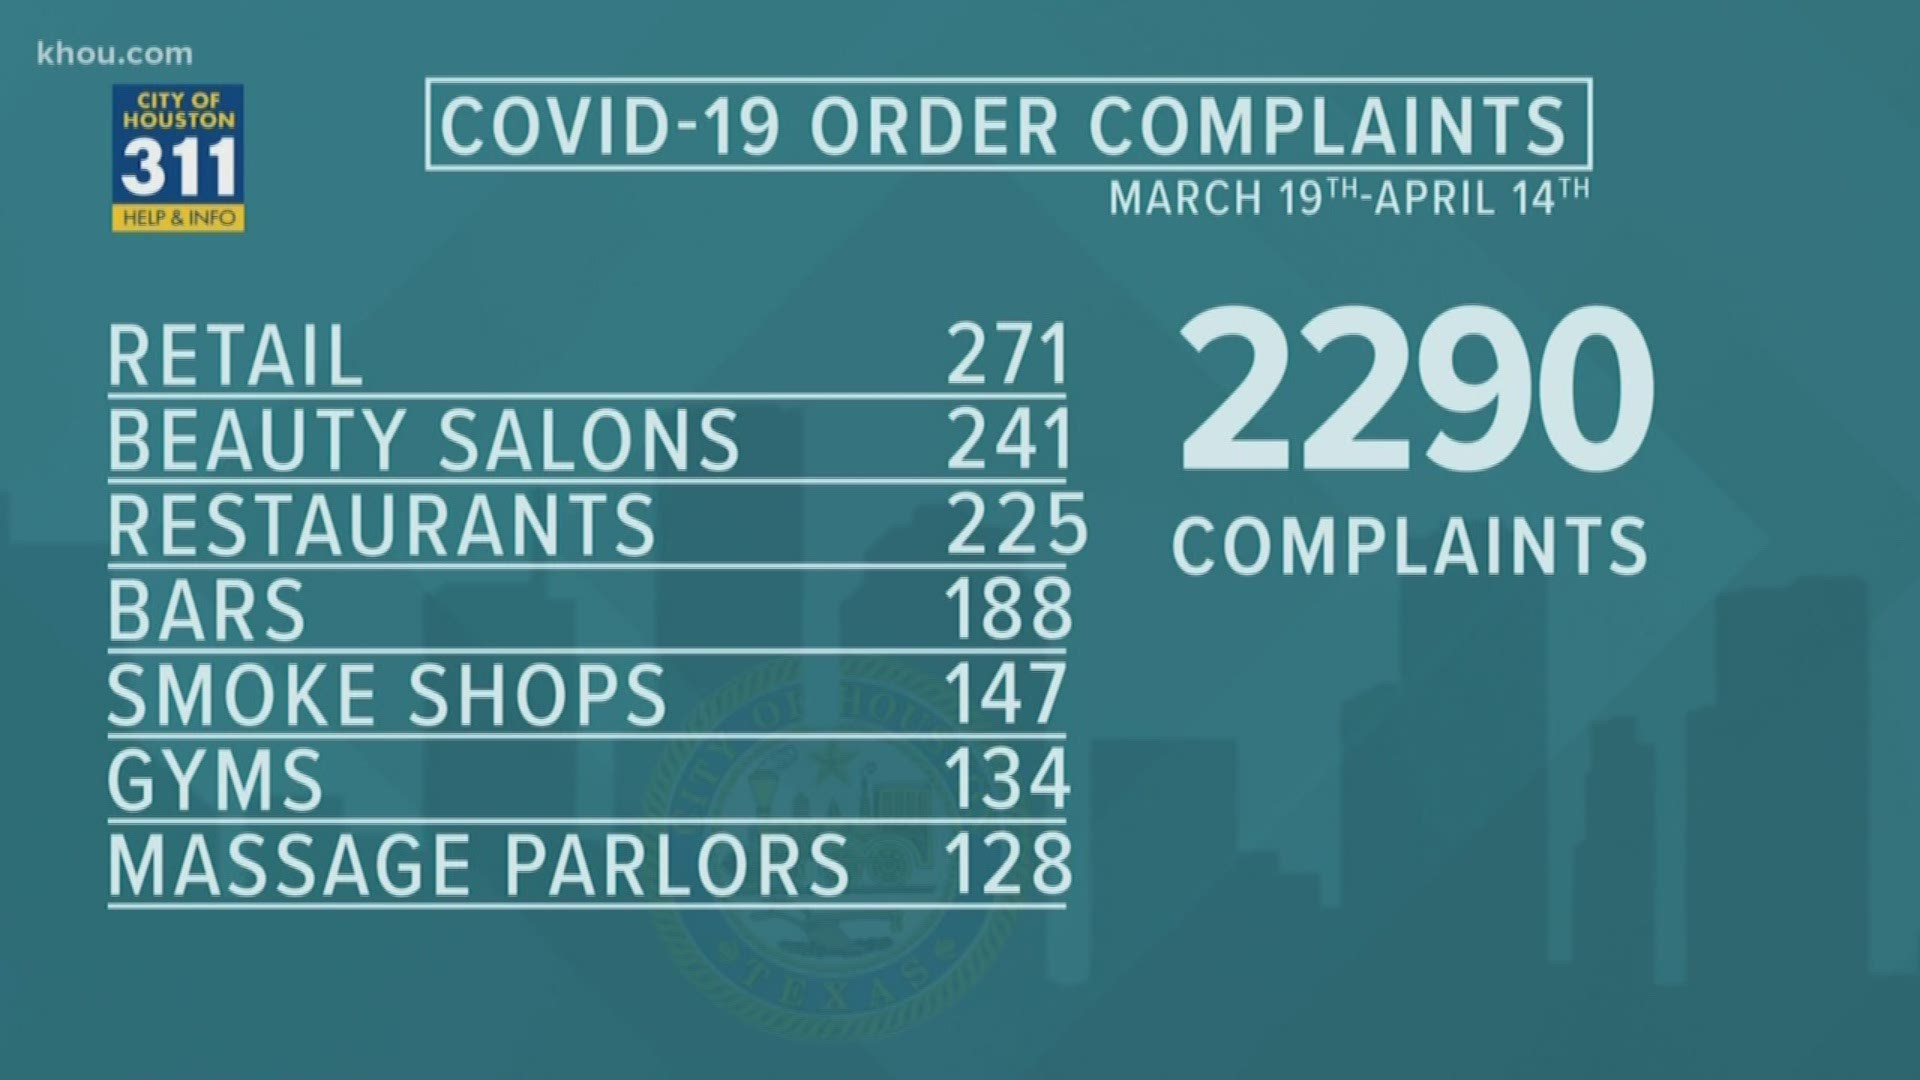 More than 2,200 complaints have come in about businesses not complying with the order over the past month.